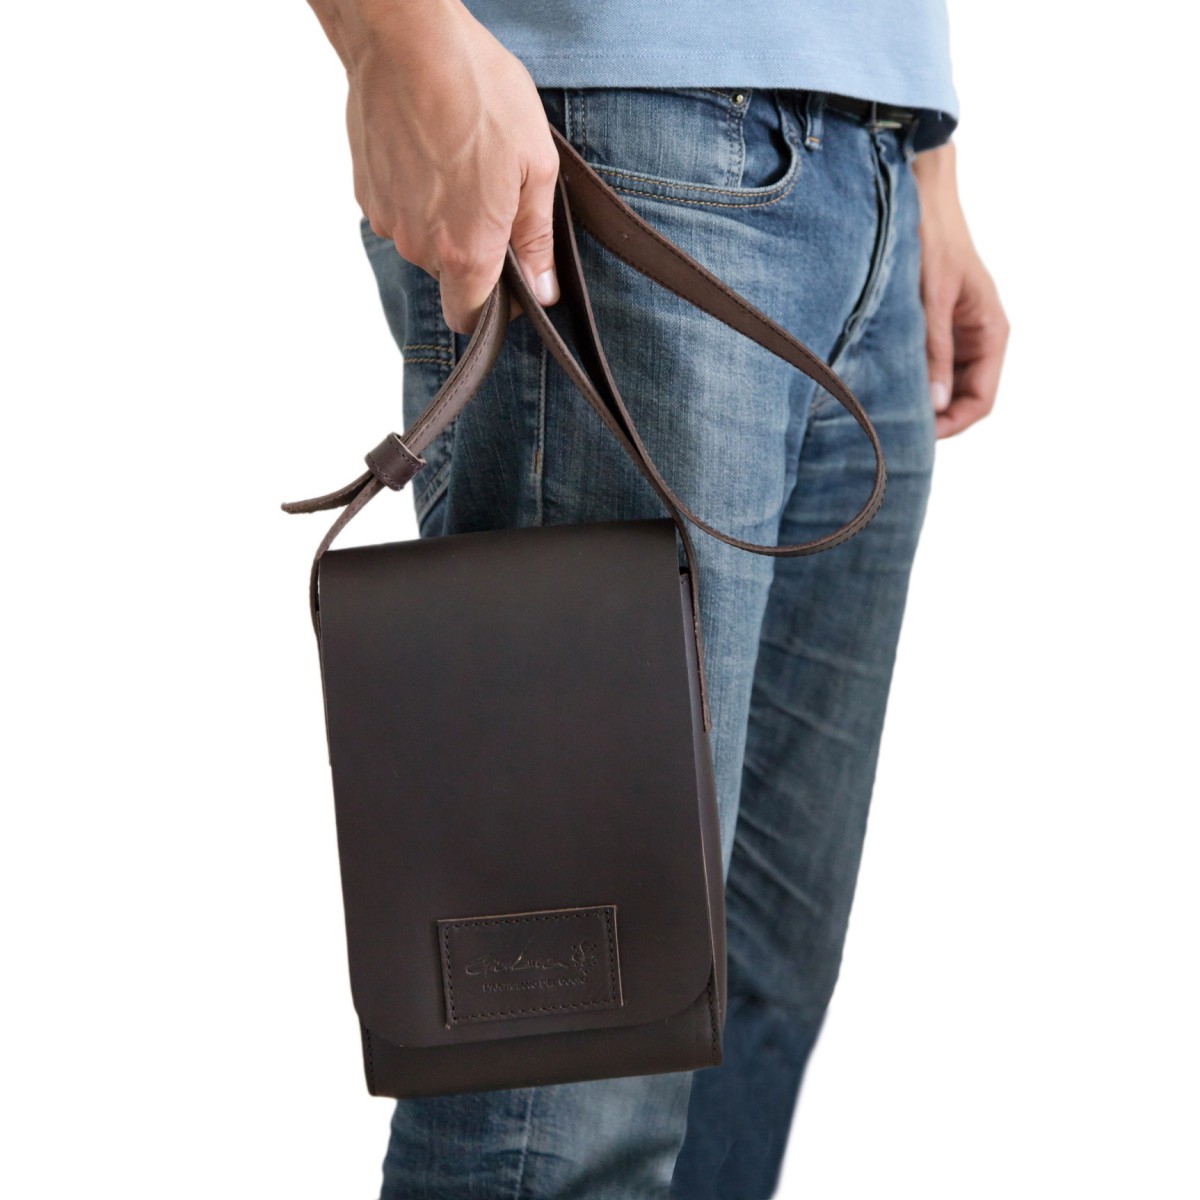 Brown leather cross body shoulder bag Handmade | Gianluca - The leather craftsman